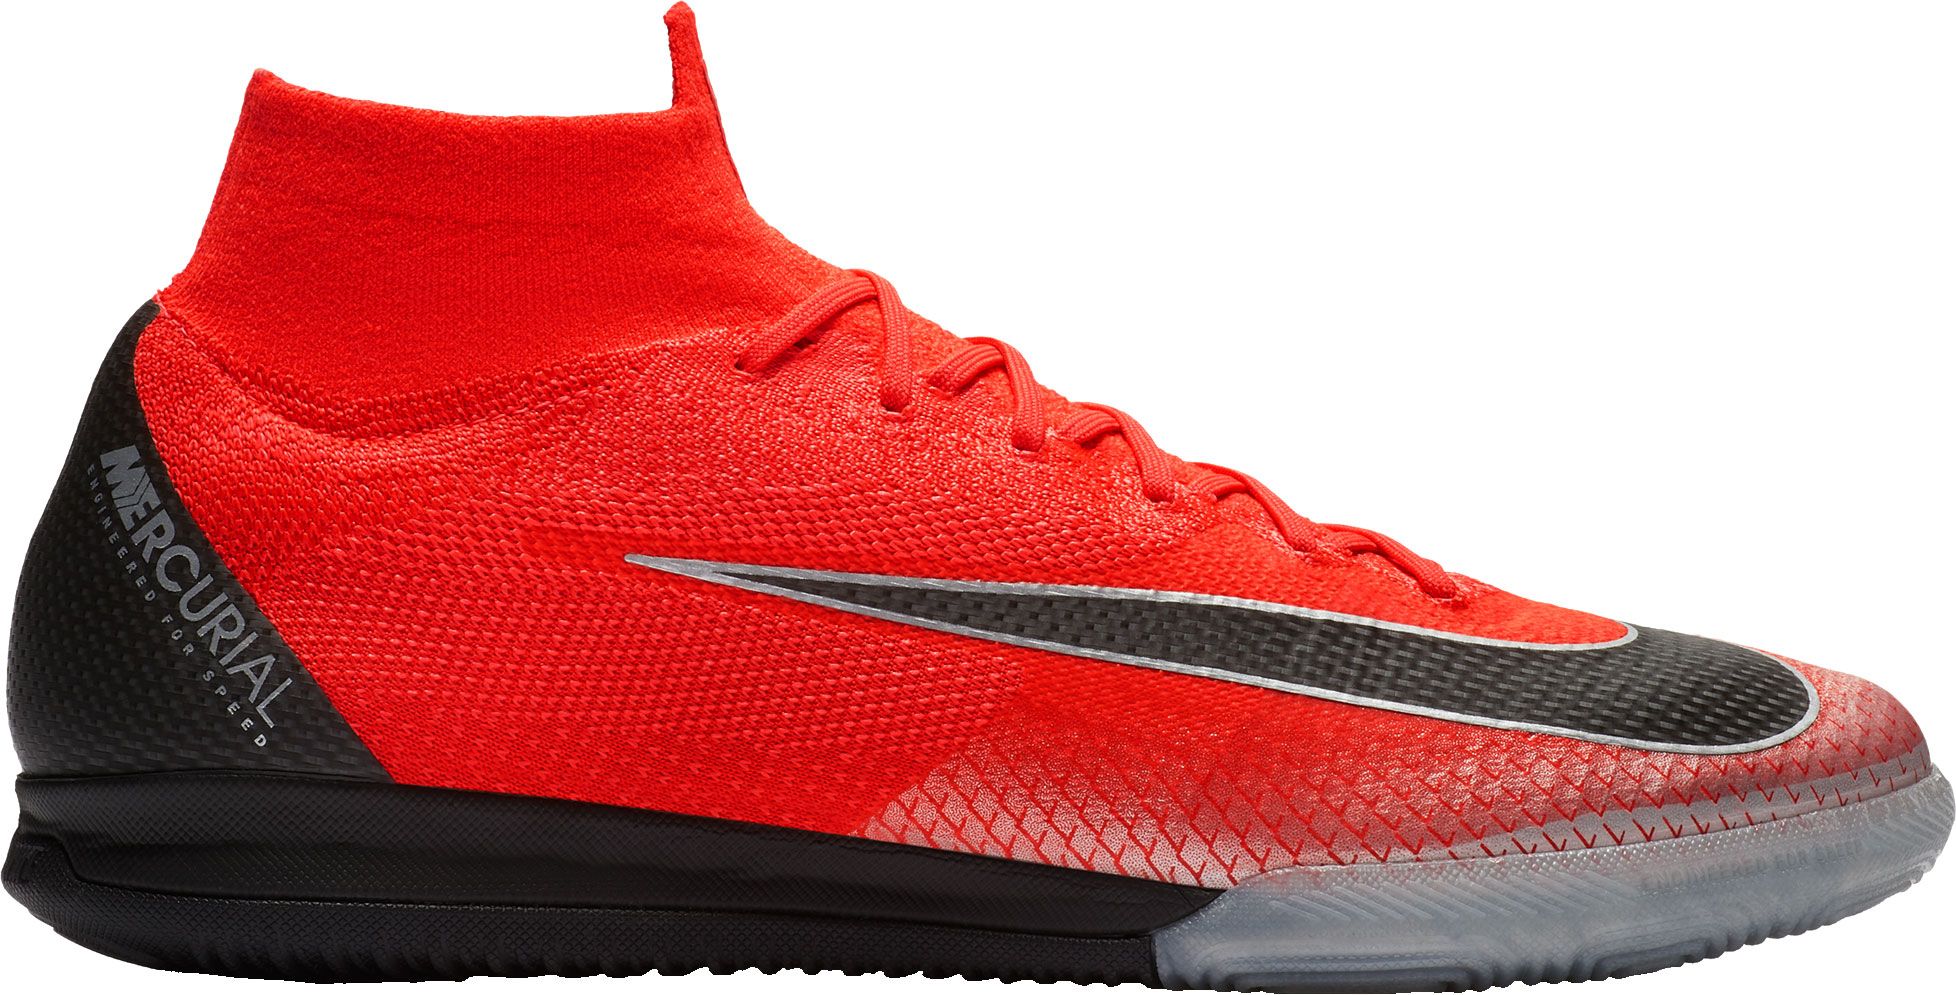 nike red indoor soccer shoes